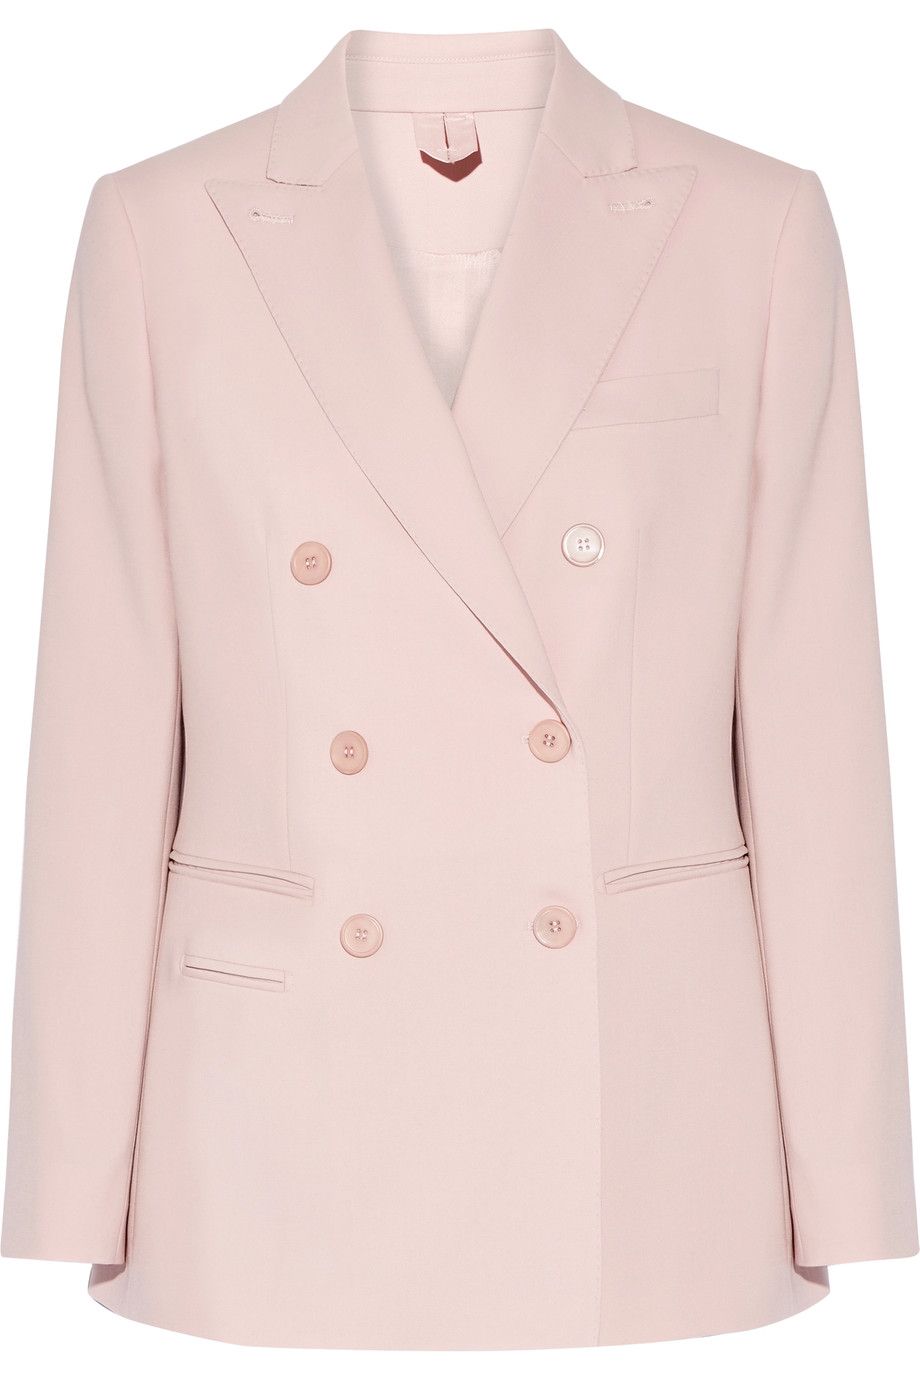 Clothing, Product, Collar, Sleeve, Coat, Textile, Outerwear, White, Dress shirt, Pink, 